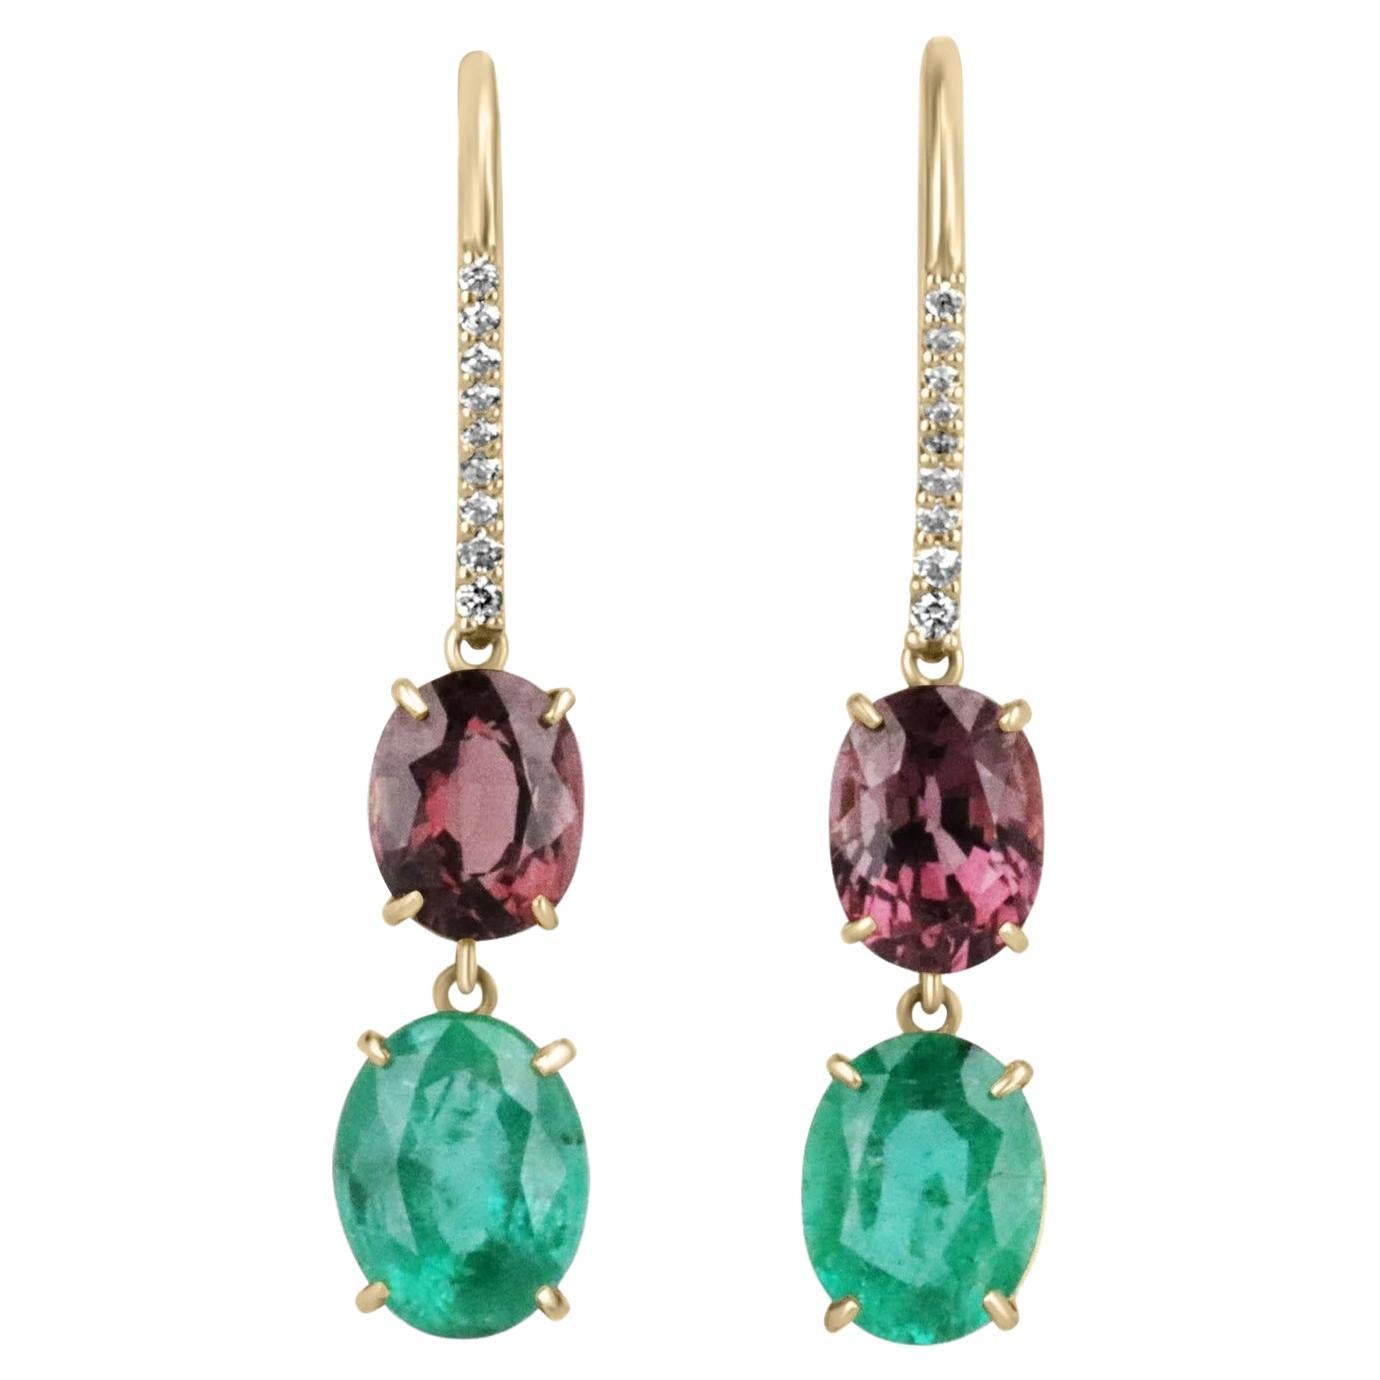 6.68tcw Vivid Green Emerald, Spinel, & Pave Diamond Accent Dangle Earrings 18K